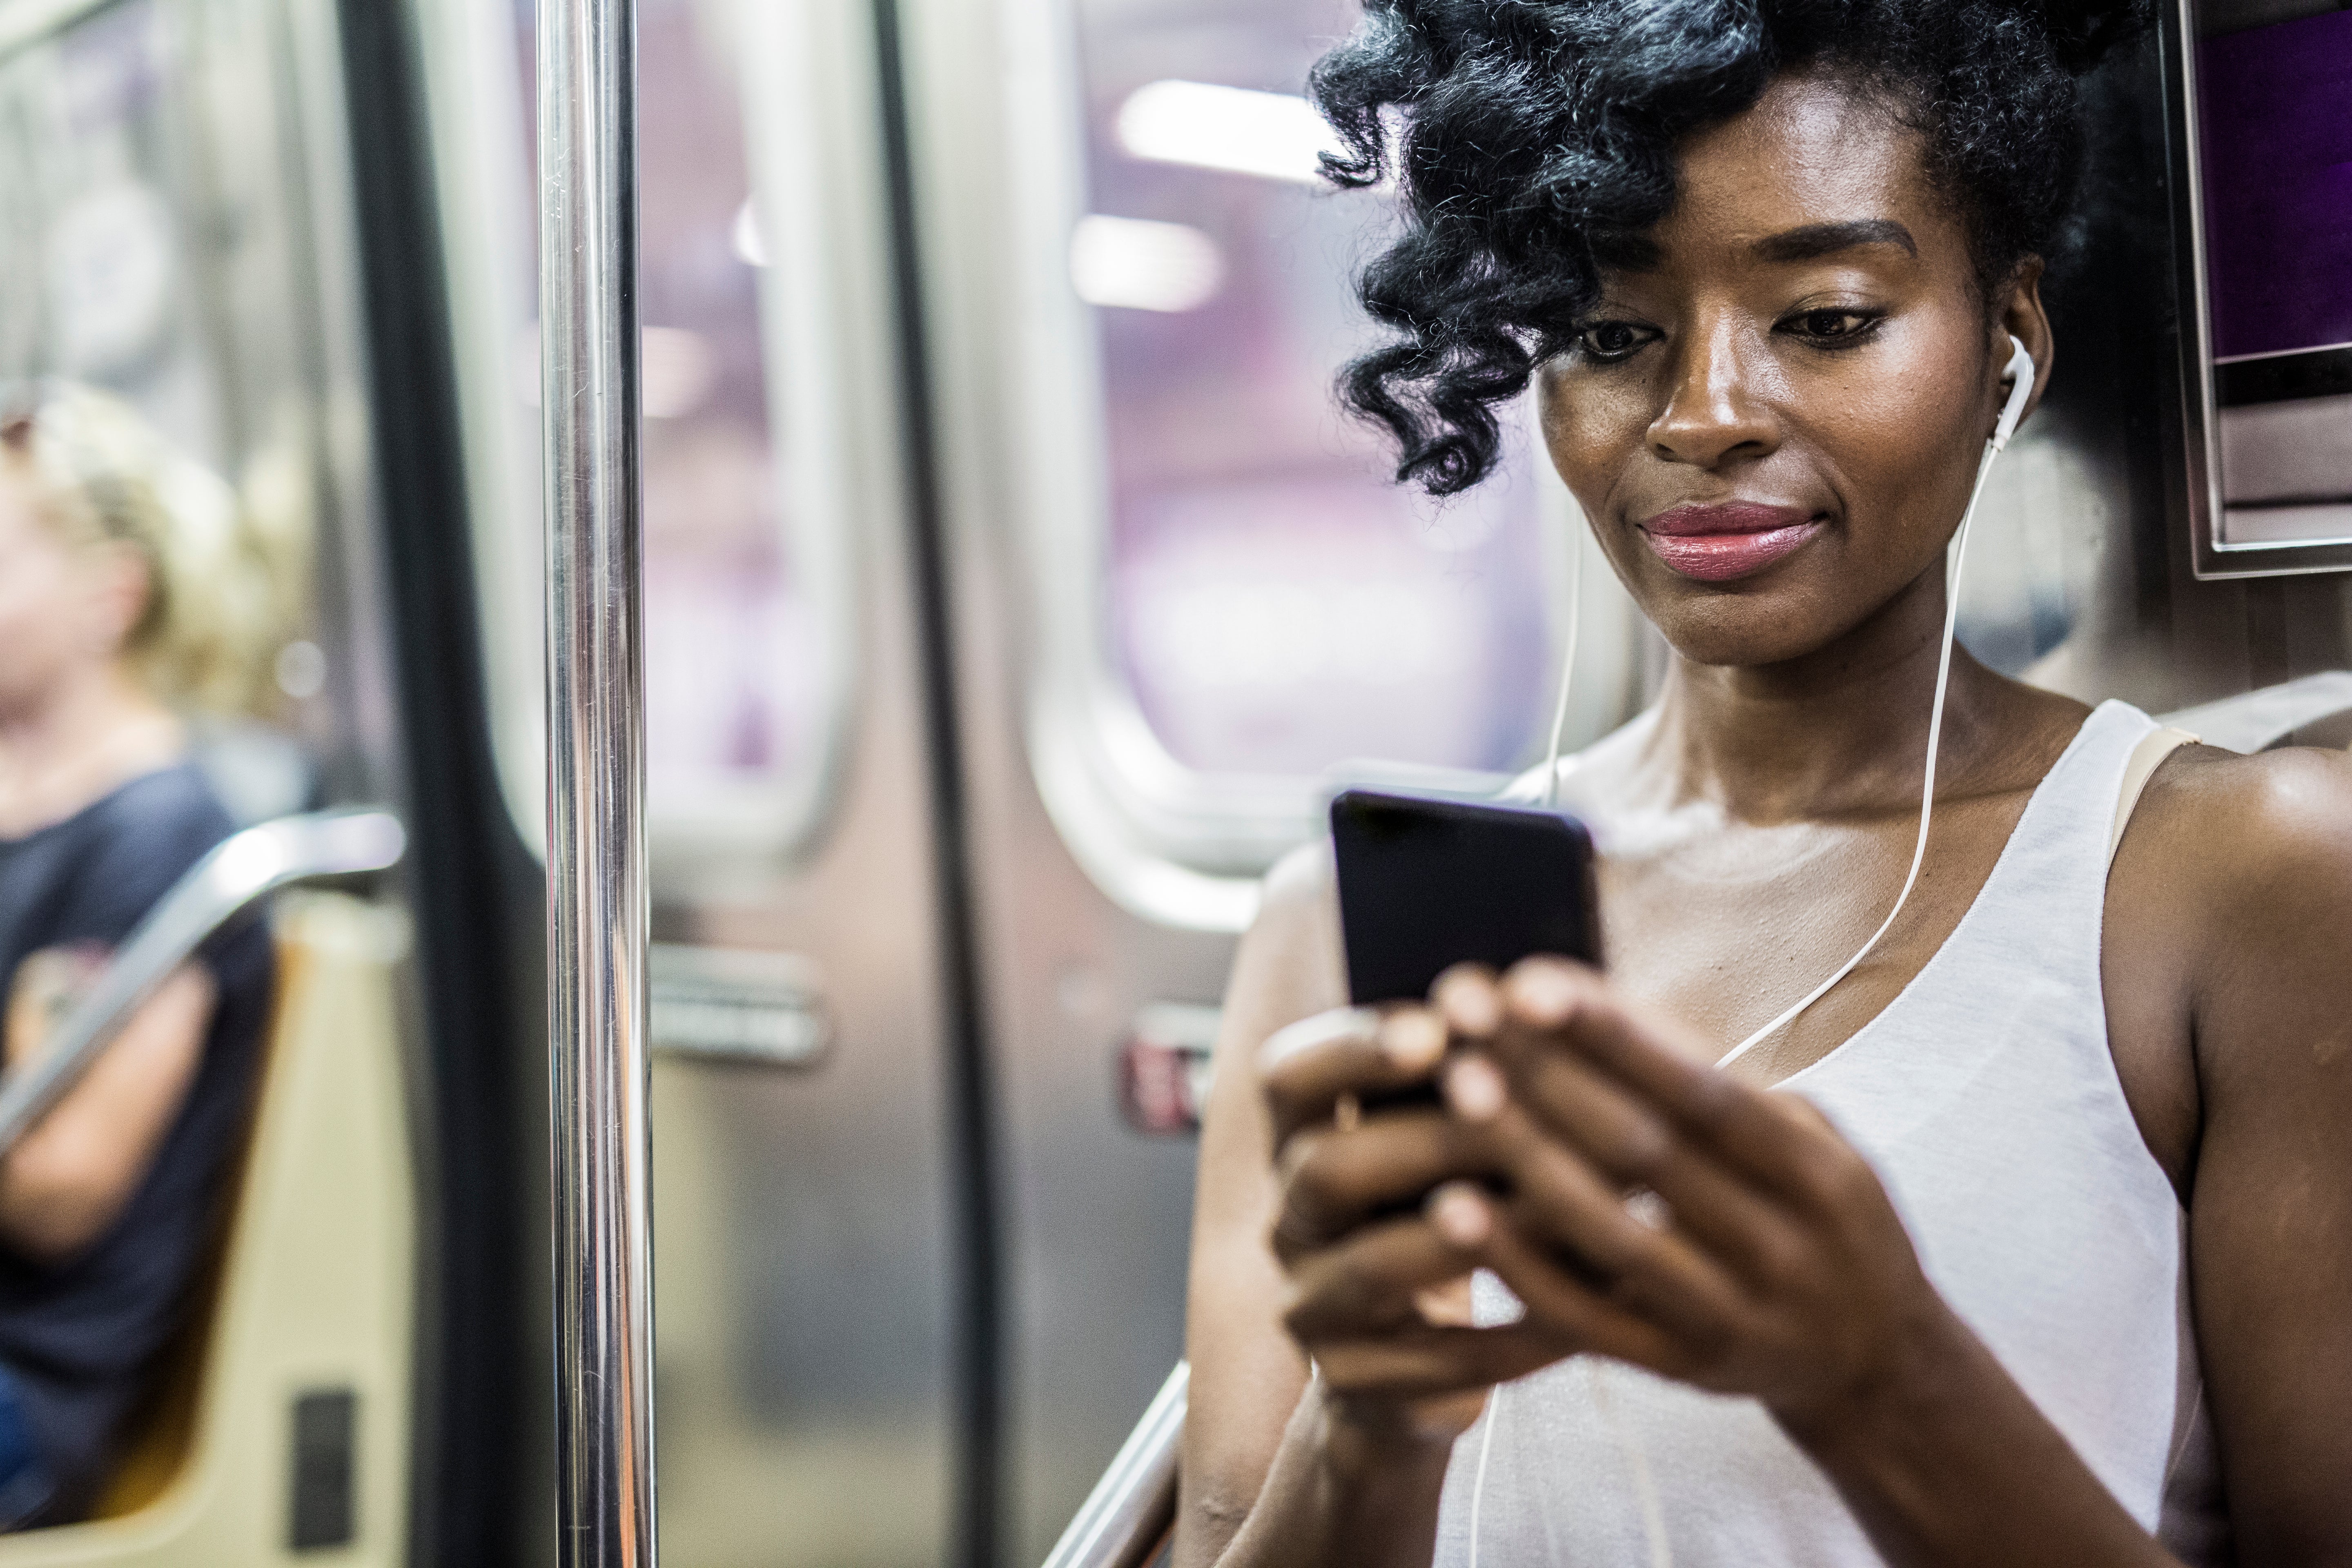 How Social Media Can Be Triggering For Black Women Trying To Practice Self-Care